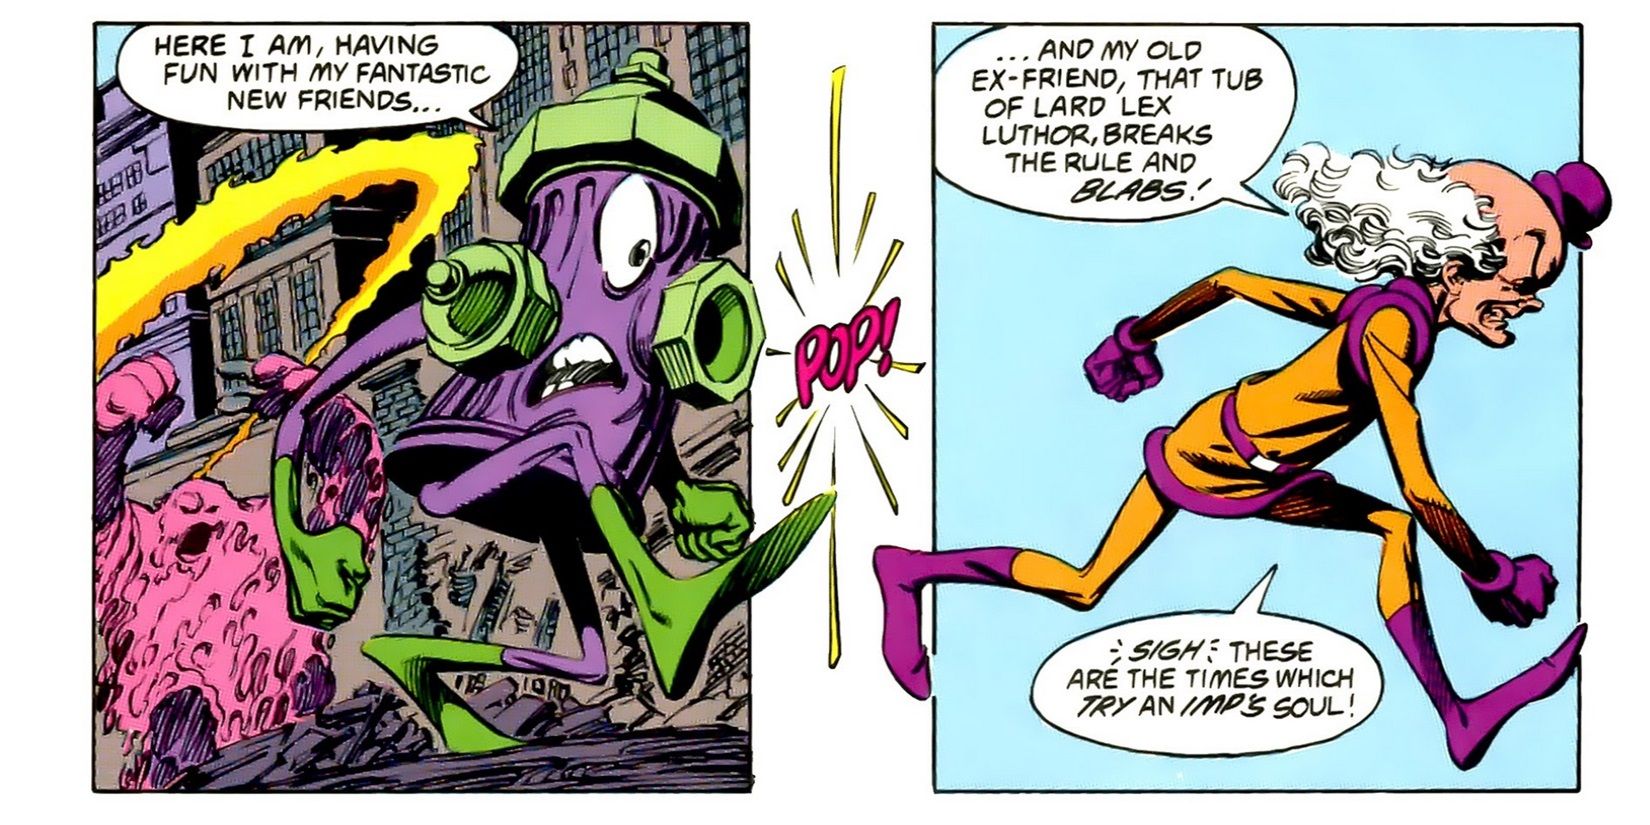 The Impossible Man Transforms Into Mr. Mxyzptlk and crosses from Marvel to DC